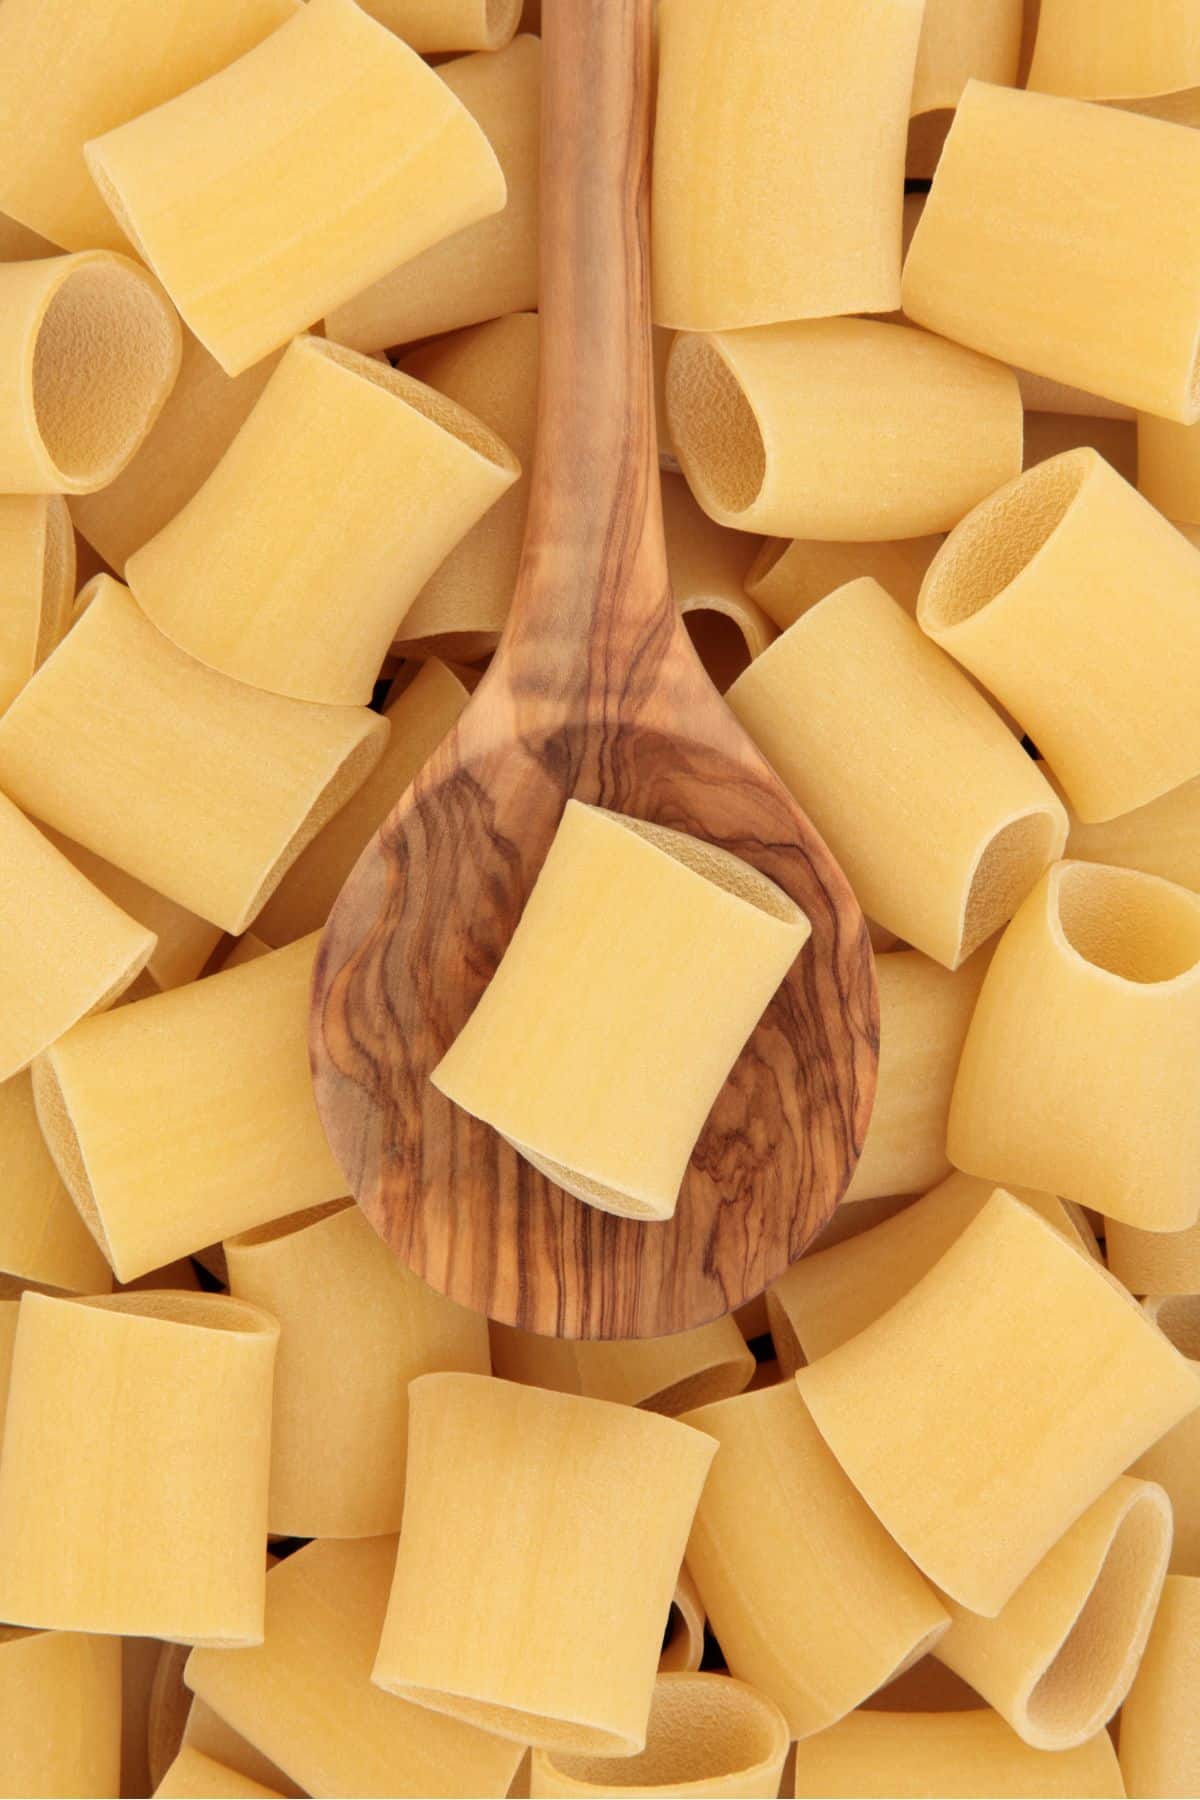 Paccheri size next to a wooden spoon.